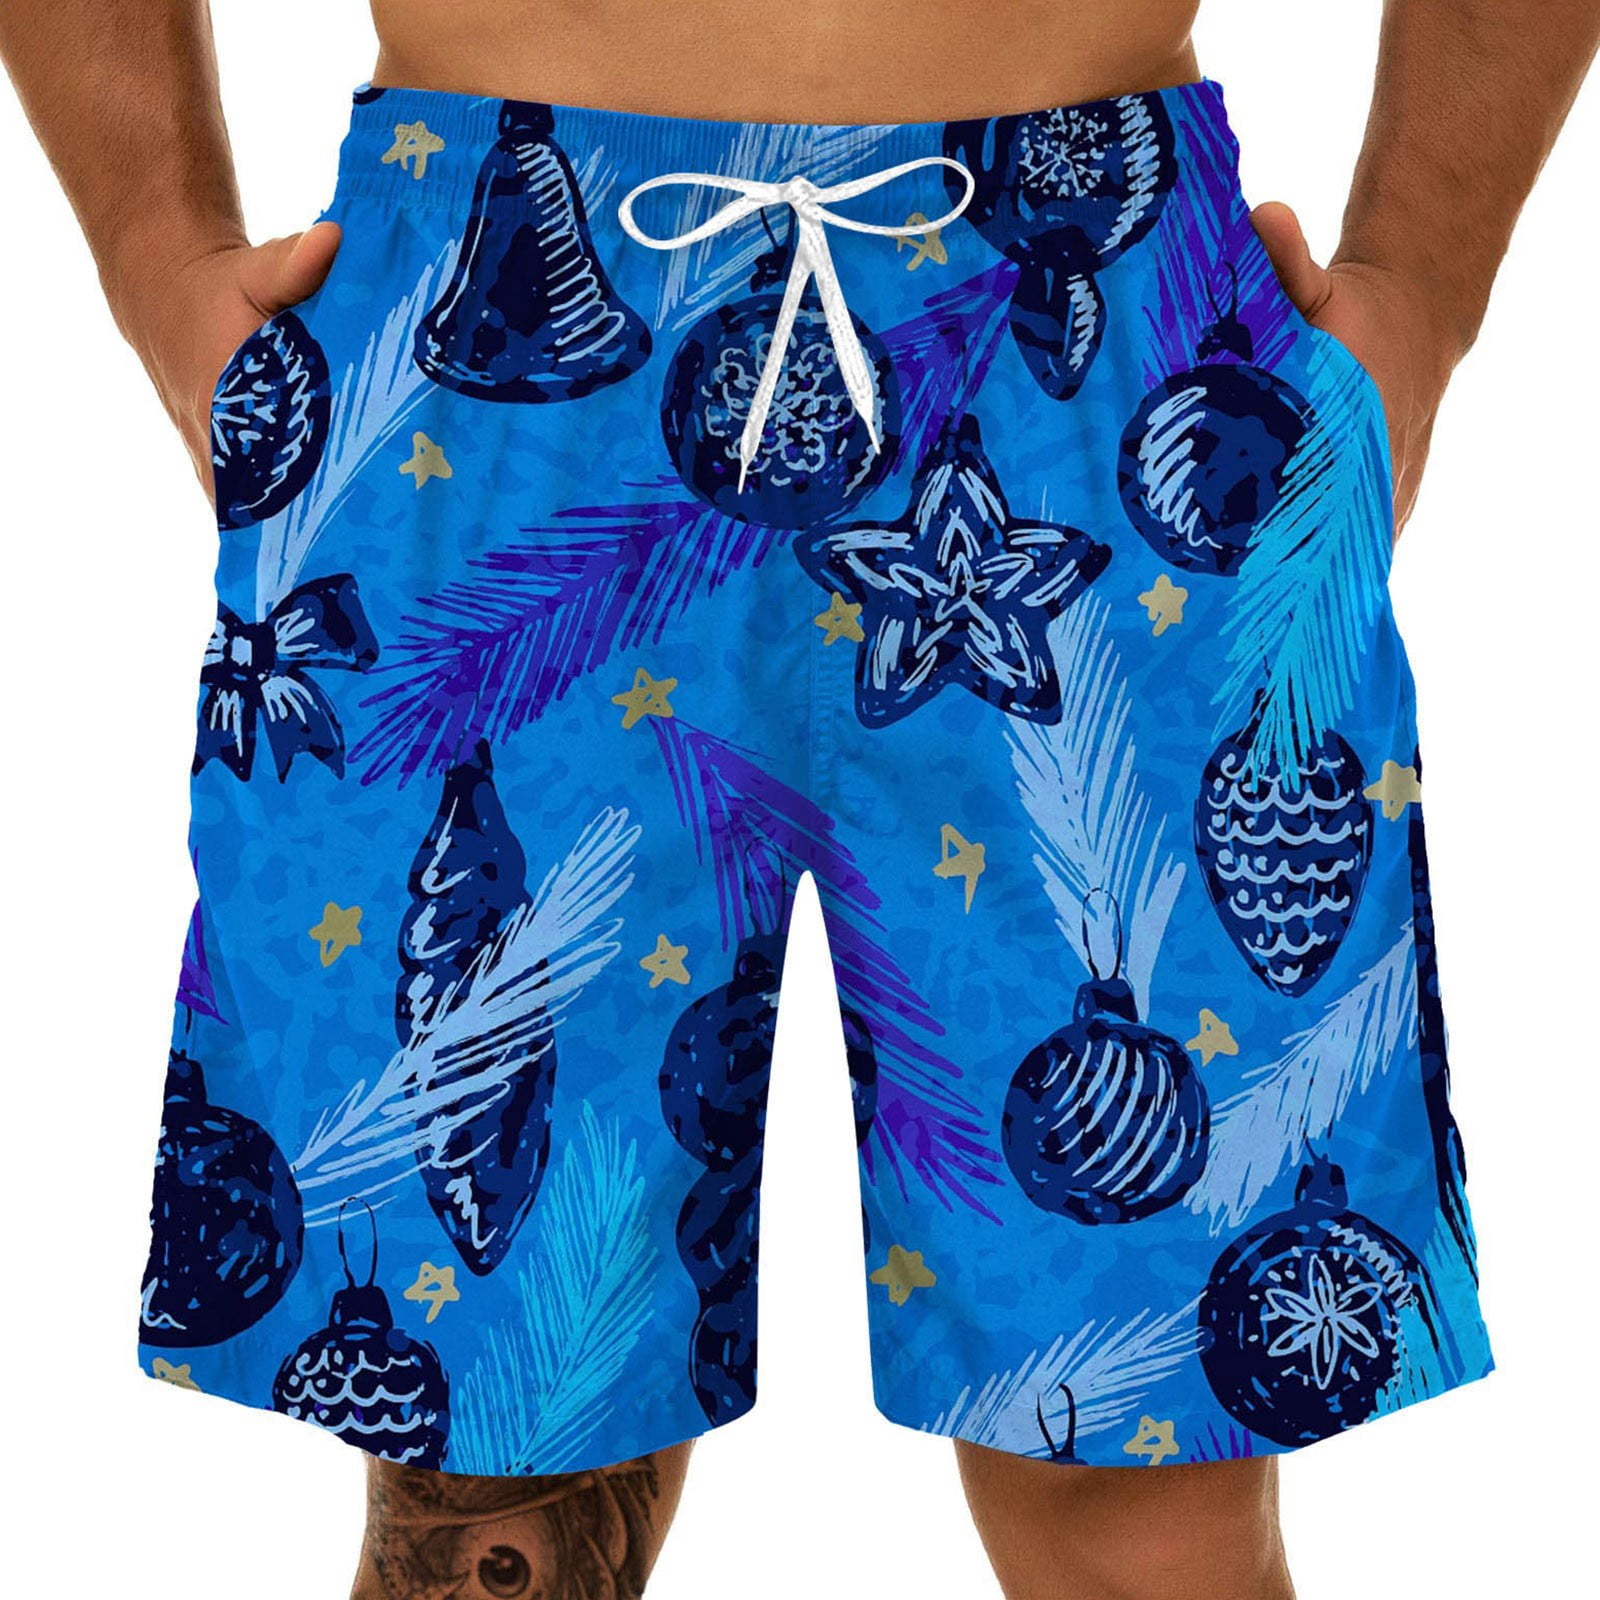 JERECY Mens Swim Trunks Cute Cartoon Fox with Rabbit Quick Dry Board Shorts with Drawstring and Pockets